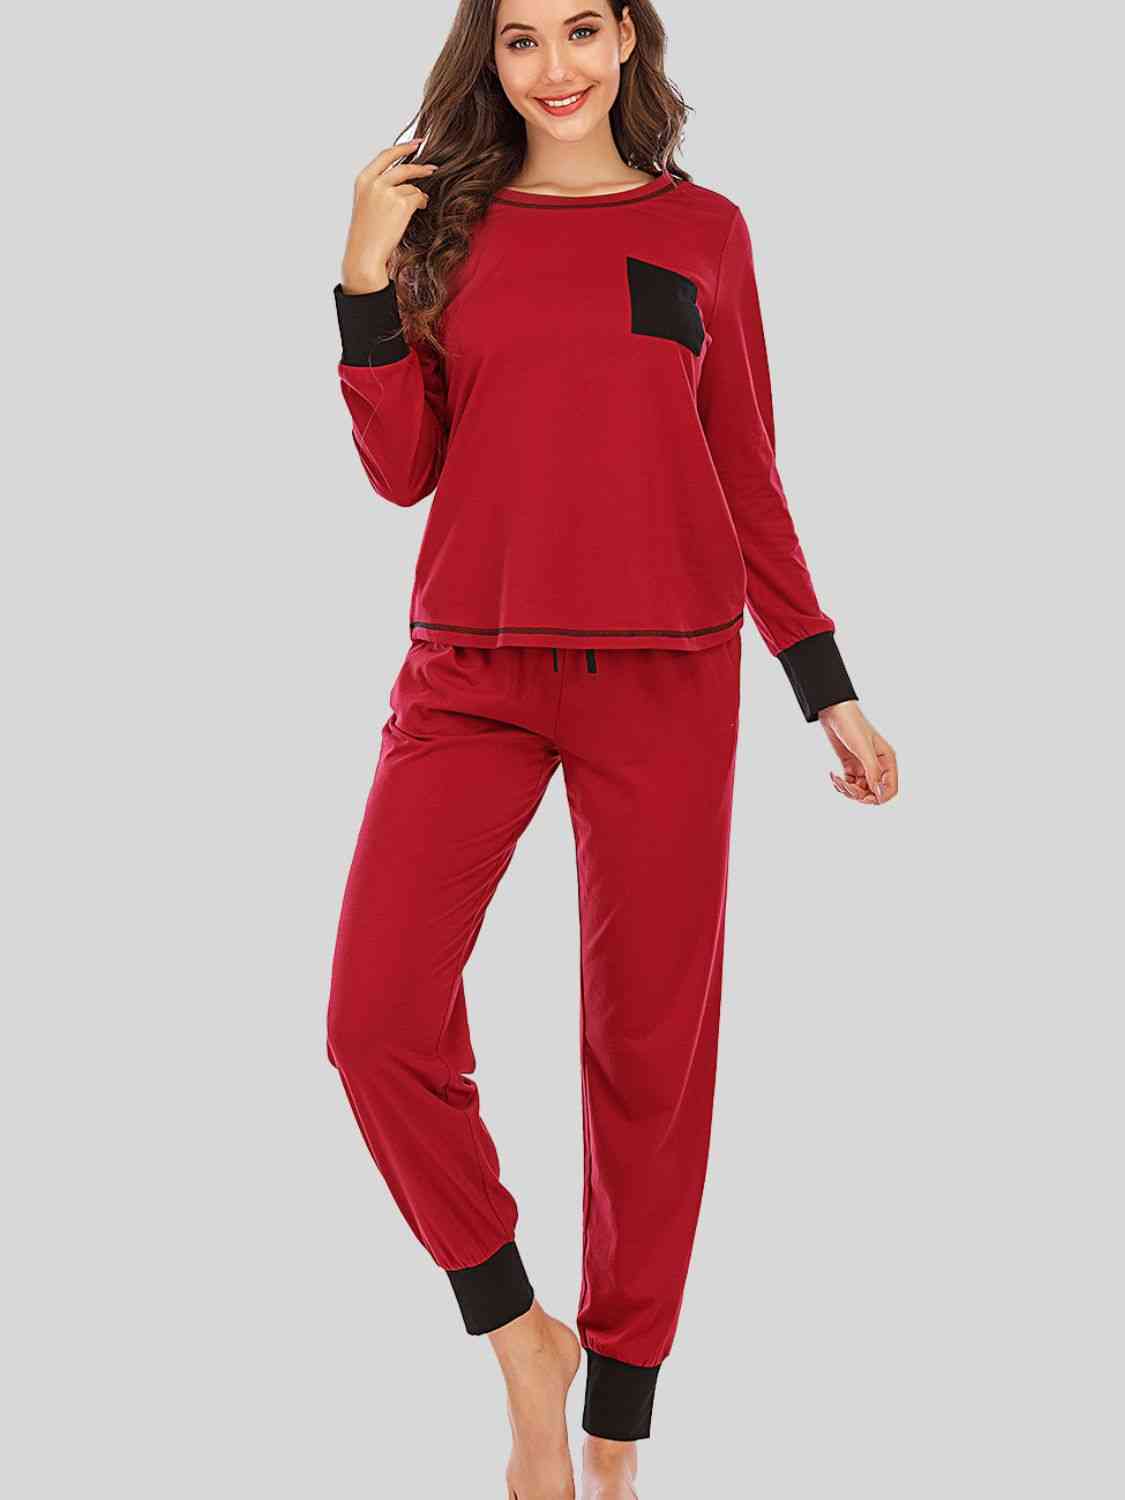 Round Neck Top and Pants Lounge Set (3 Colors) Loungewear Krazy Heart Designs Boutique Wine S 